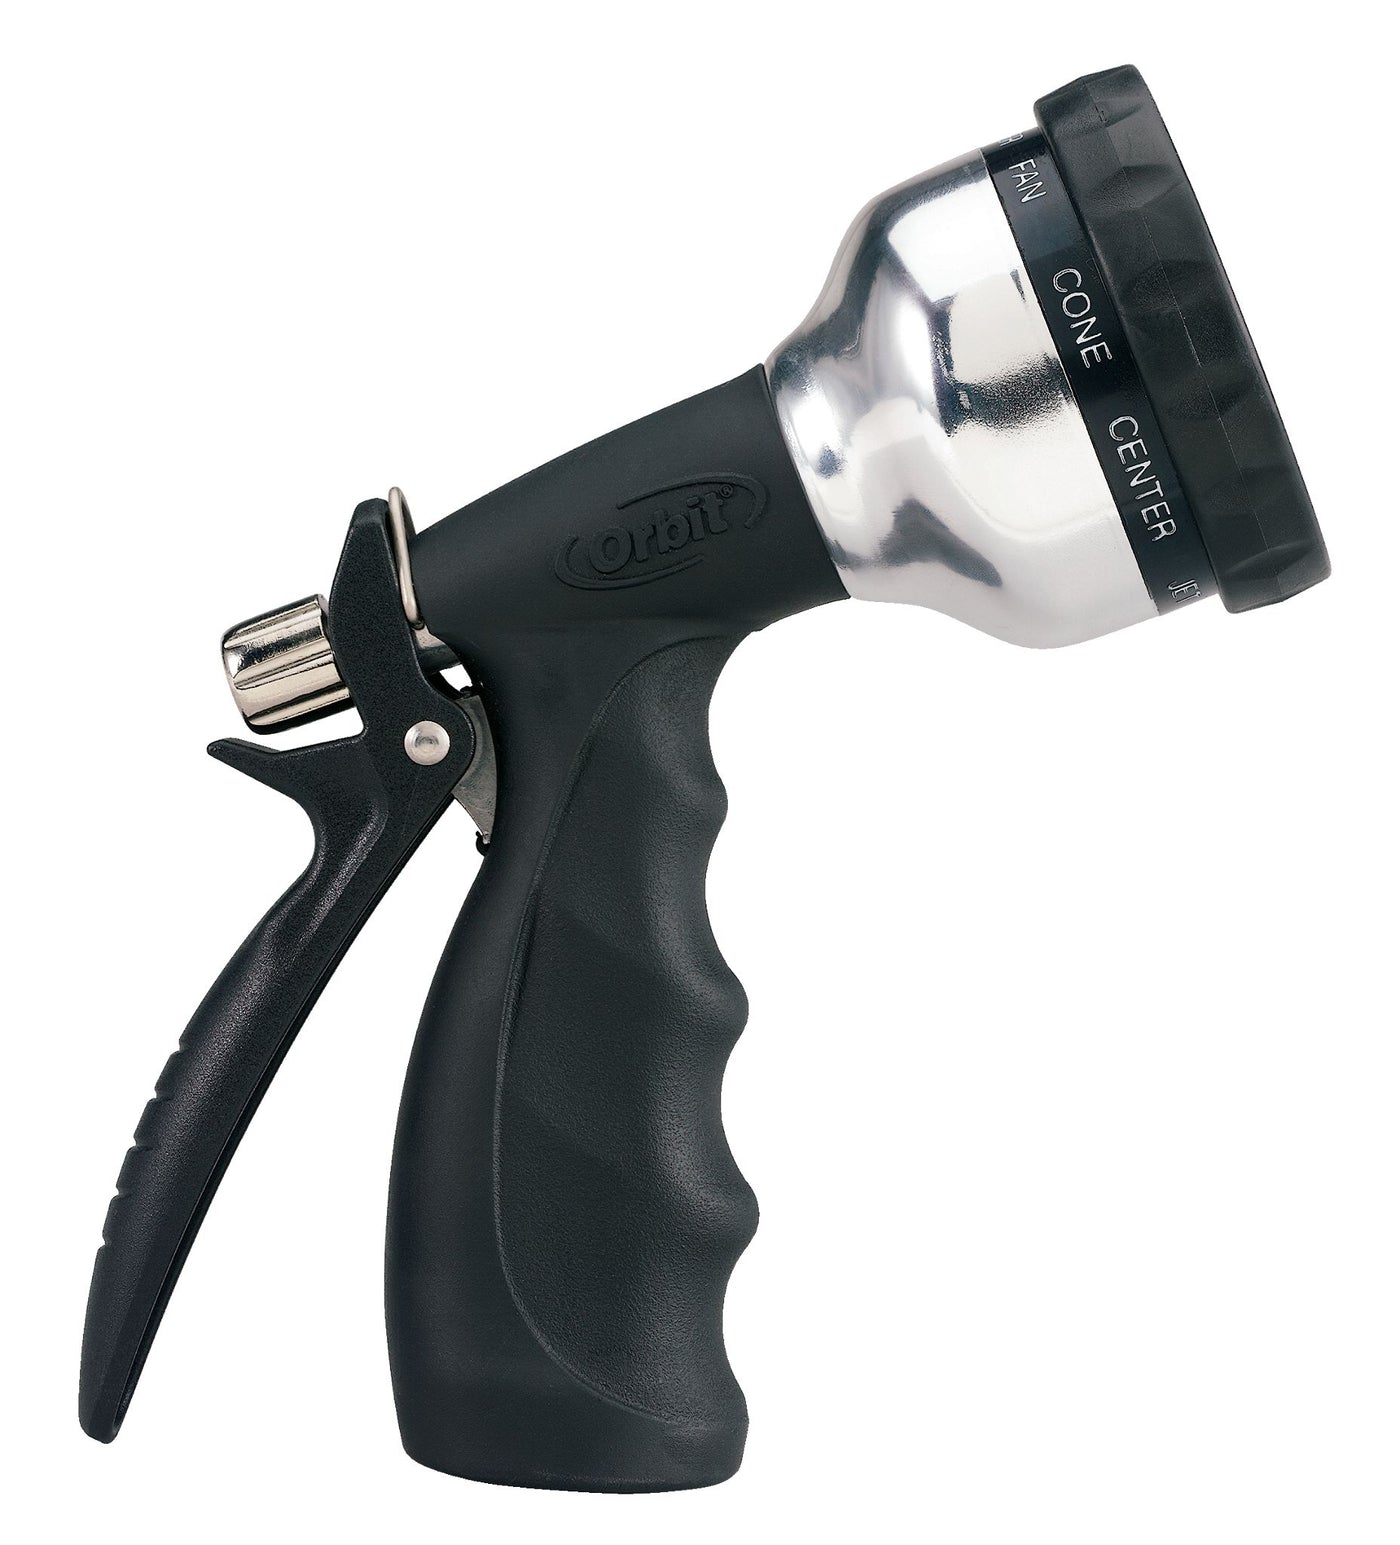 Side view of an Ultralight 10-pattern metal rear trigger hose nozzle, with rubberized non-slip grip.